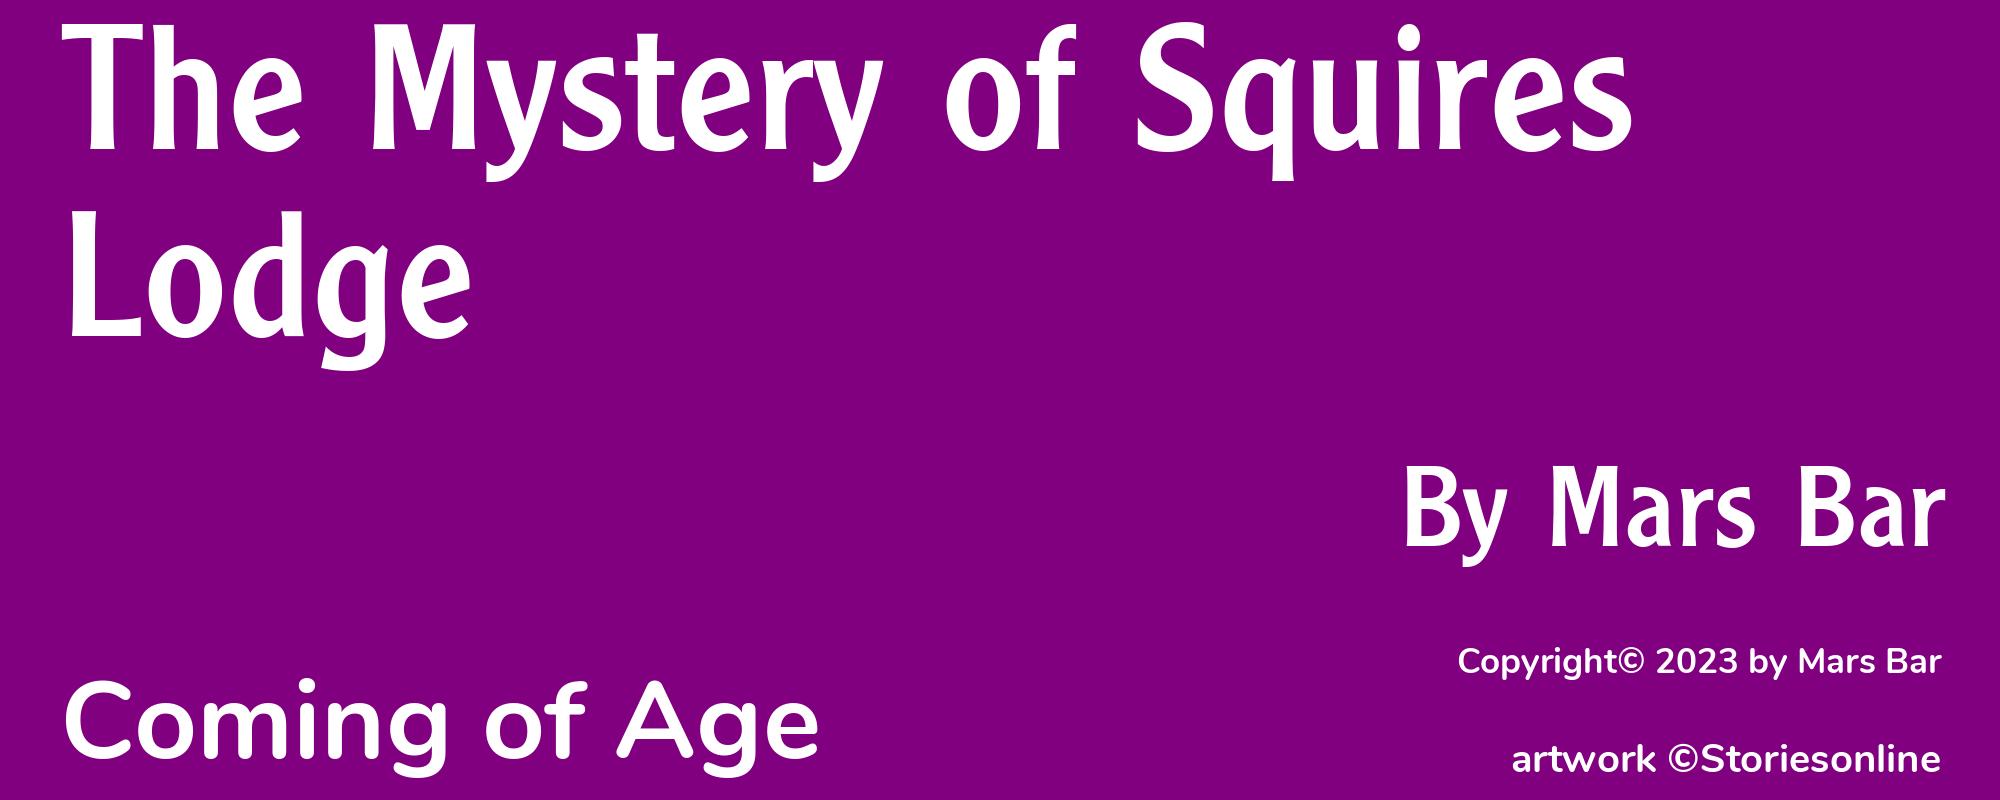 The Mystery of Squires Lodge - Cover